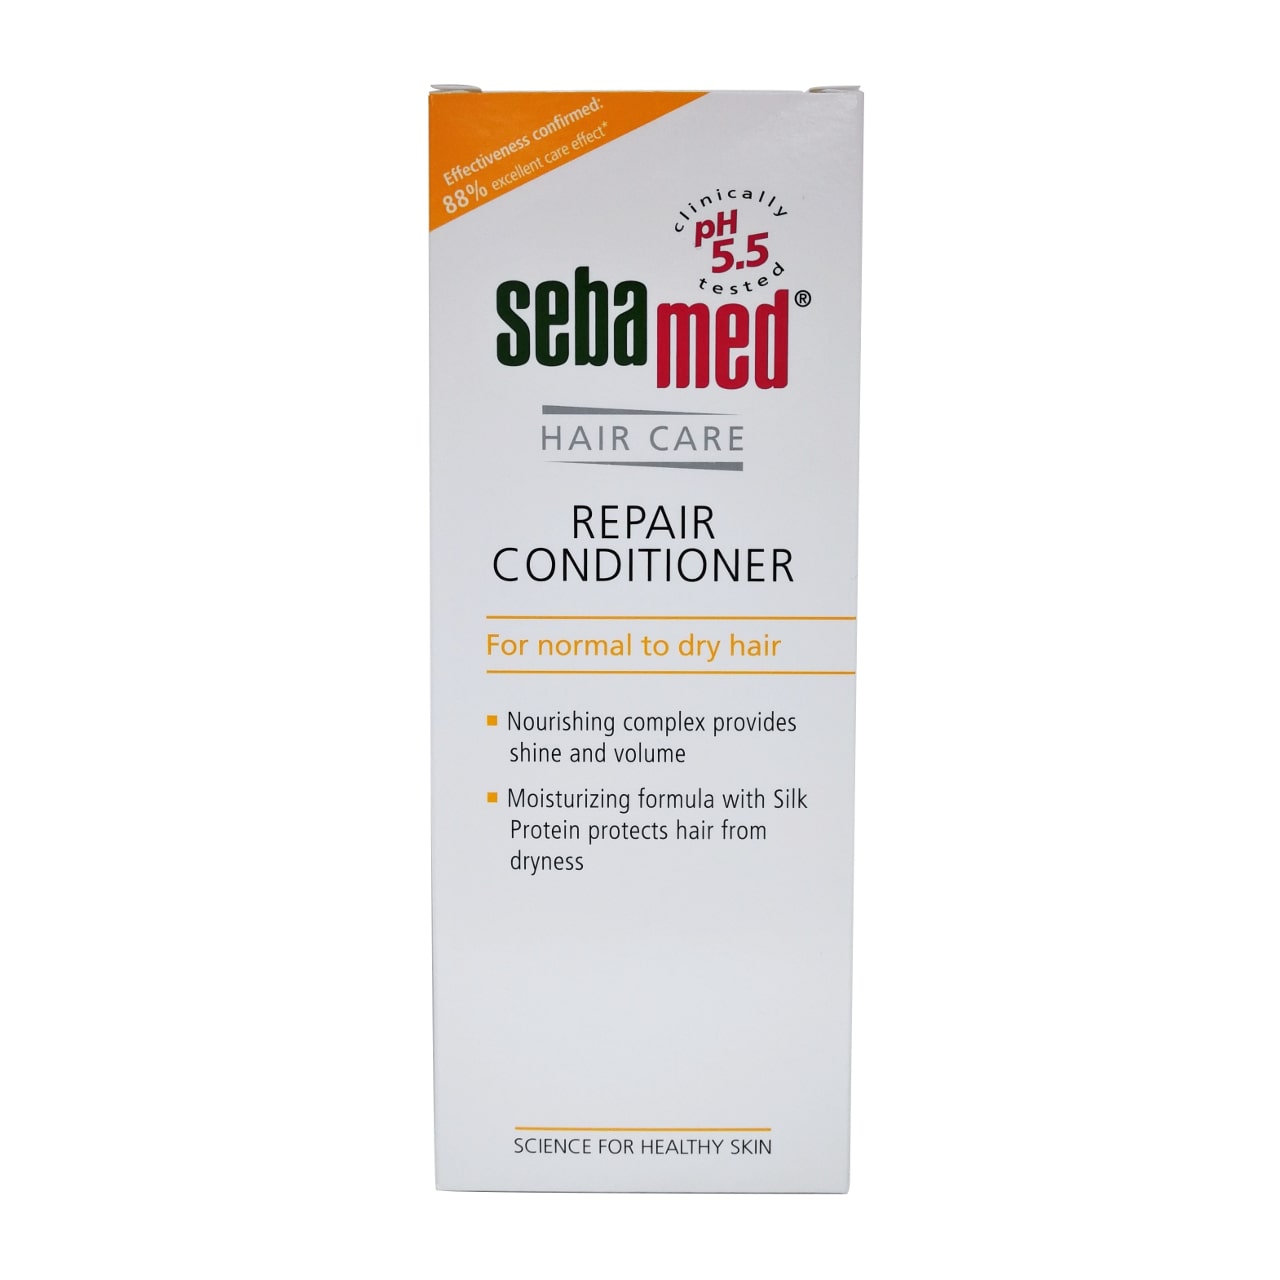 Product label for Sebamed Hair Care Repair Conditioner in English